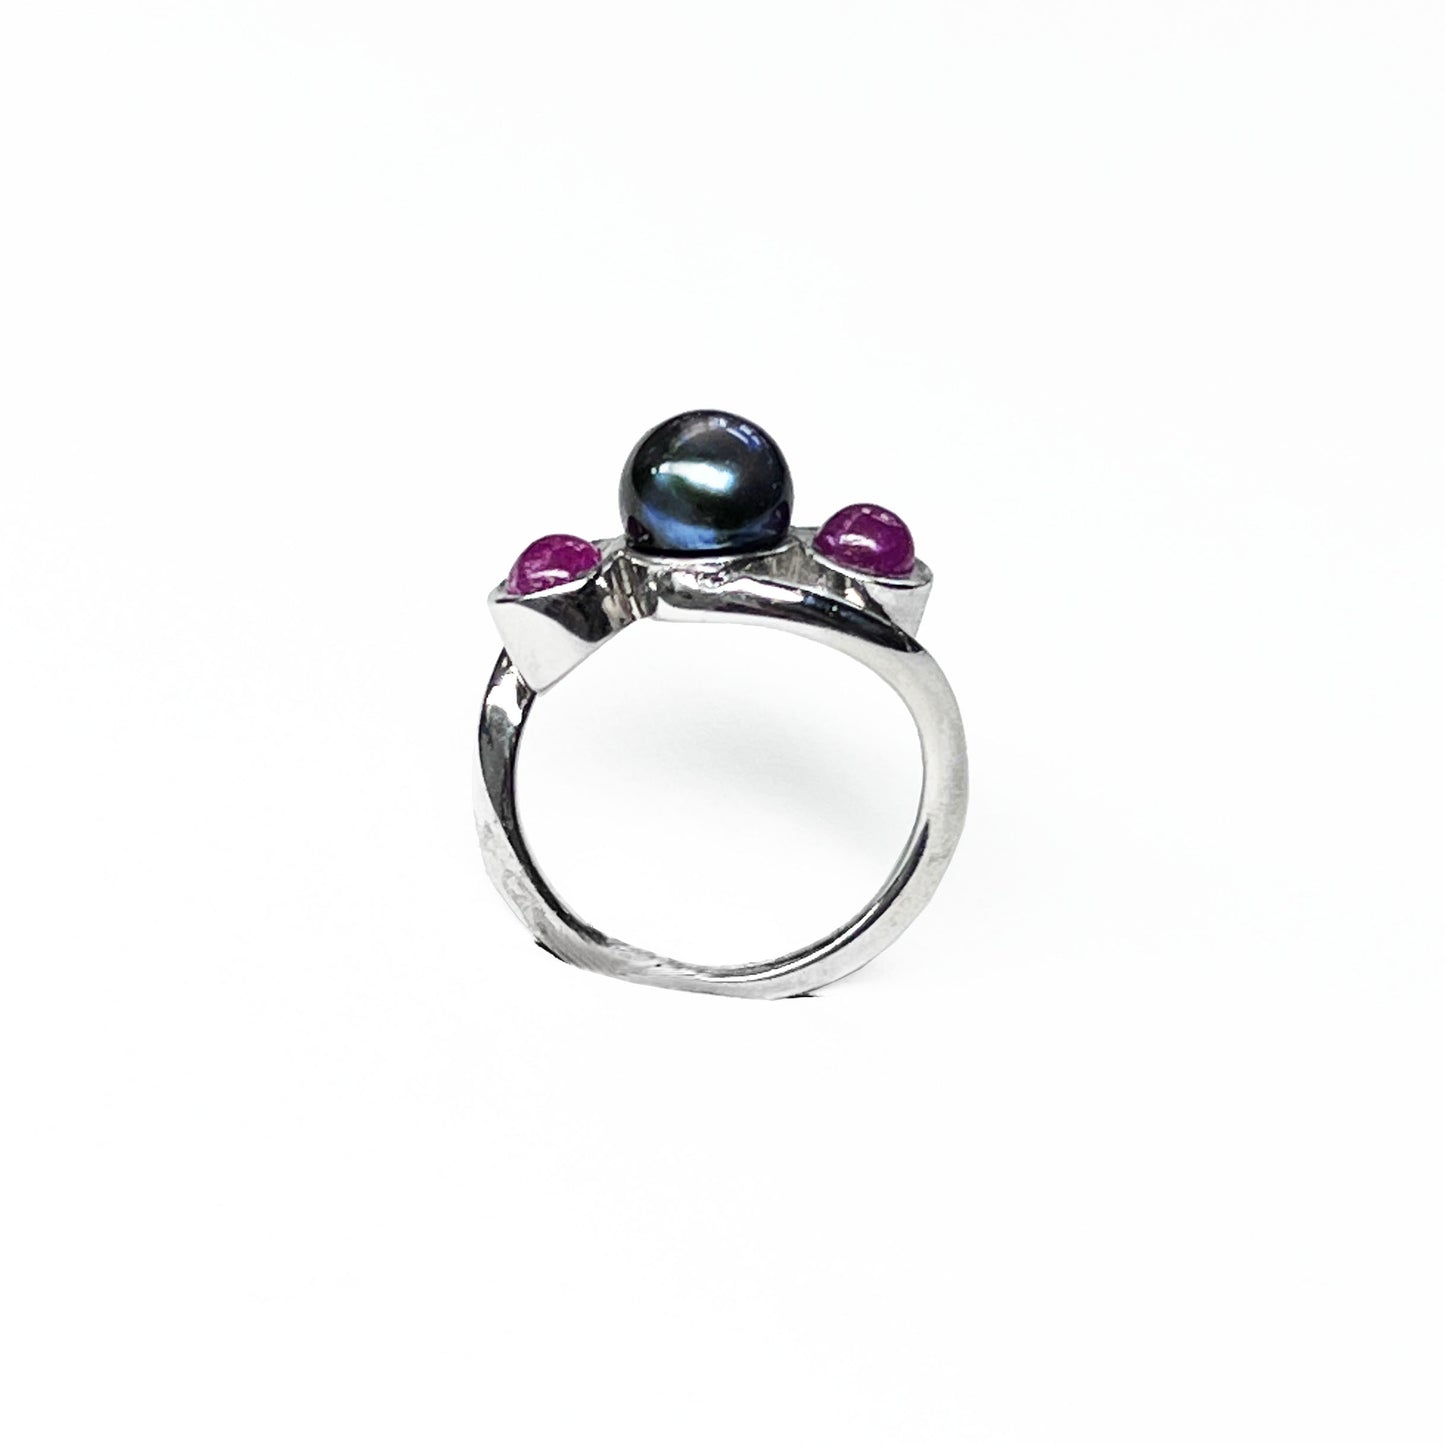 14kw Black Pearl and Ruby Ring